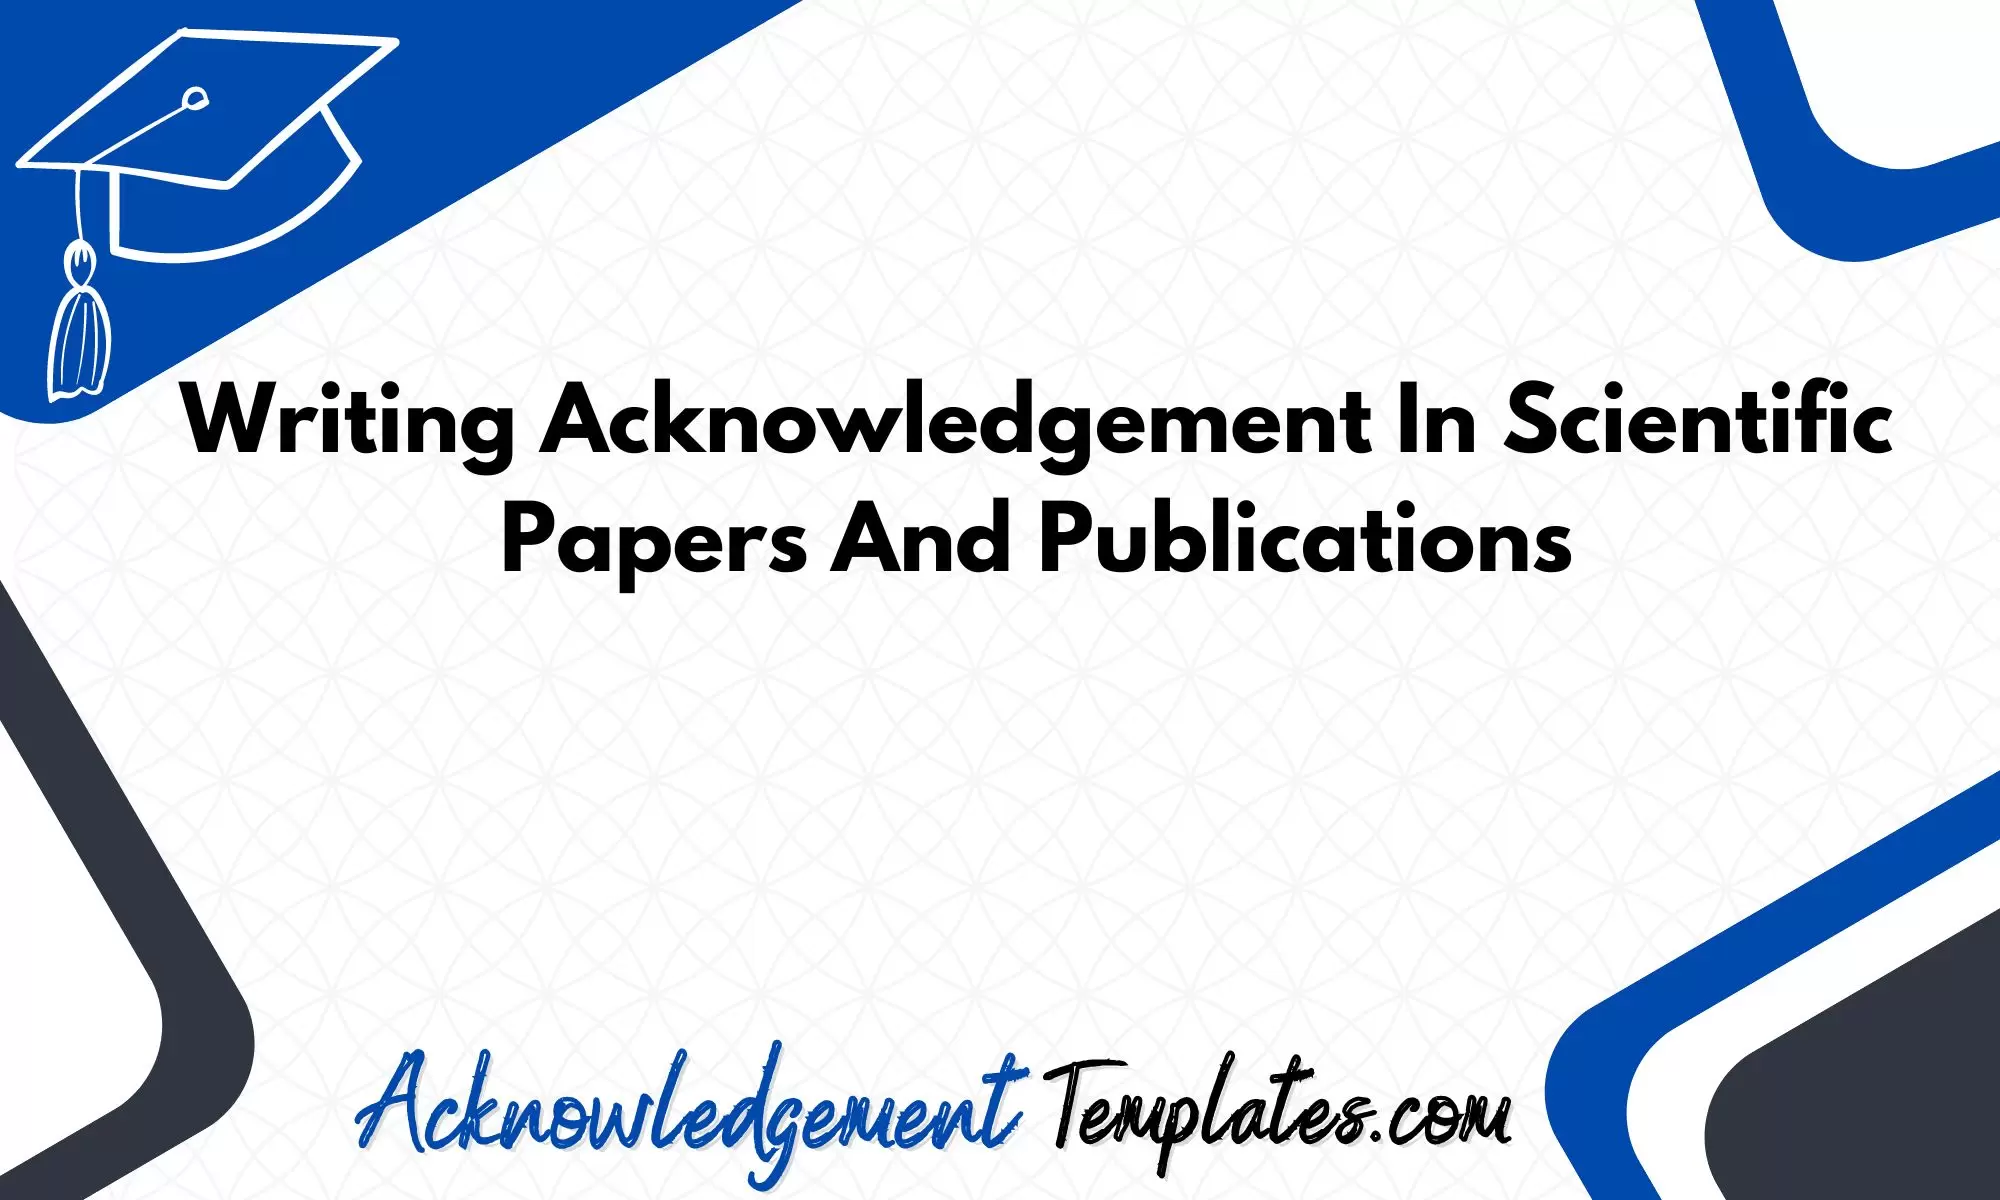 Writing Acknowledgement In Scientific Papers And Publications